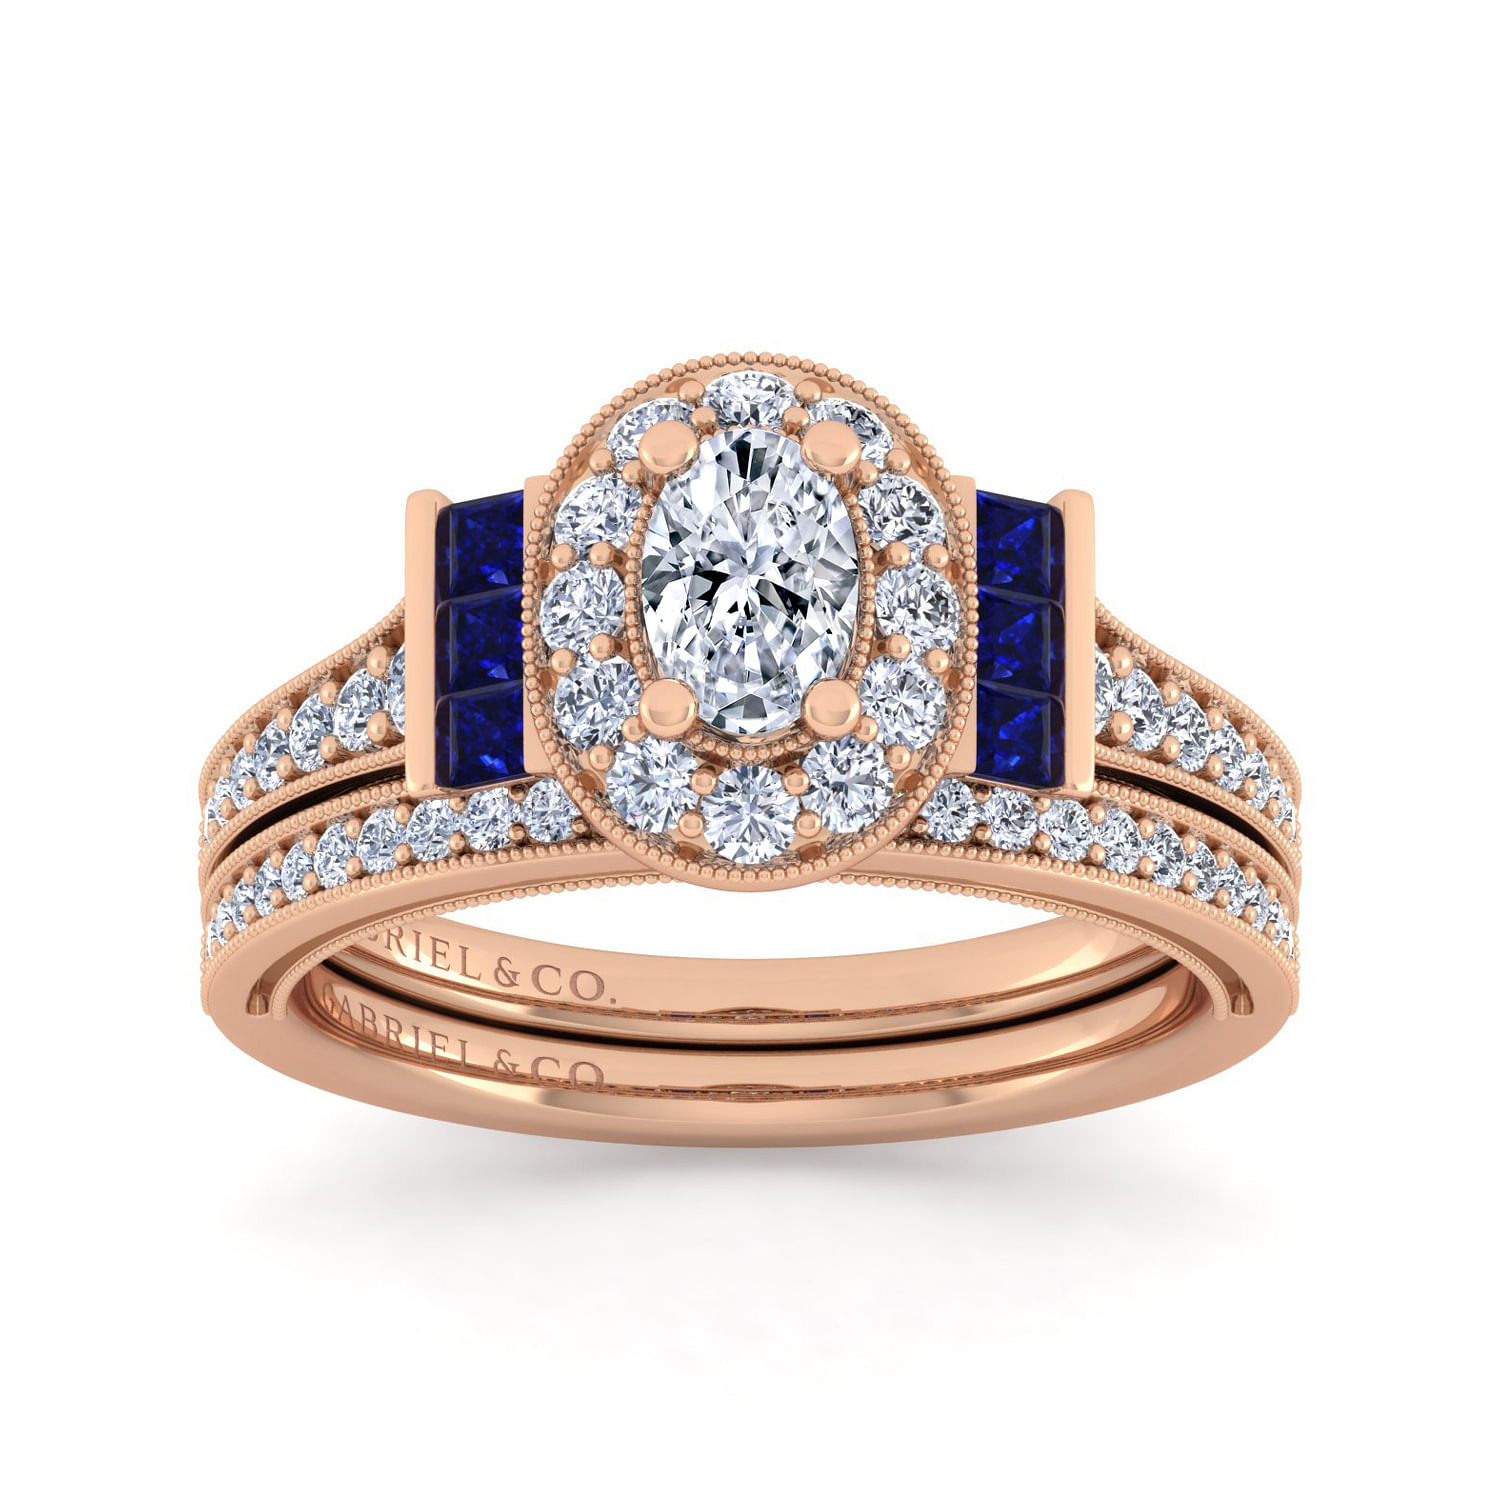 Vintage Inspired 14K Rose Gold Oval Halo Diamond and Sapphire Engagement Ring